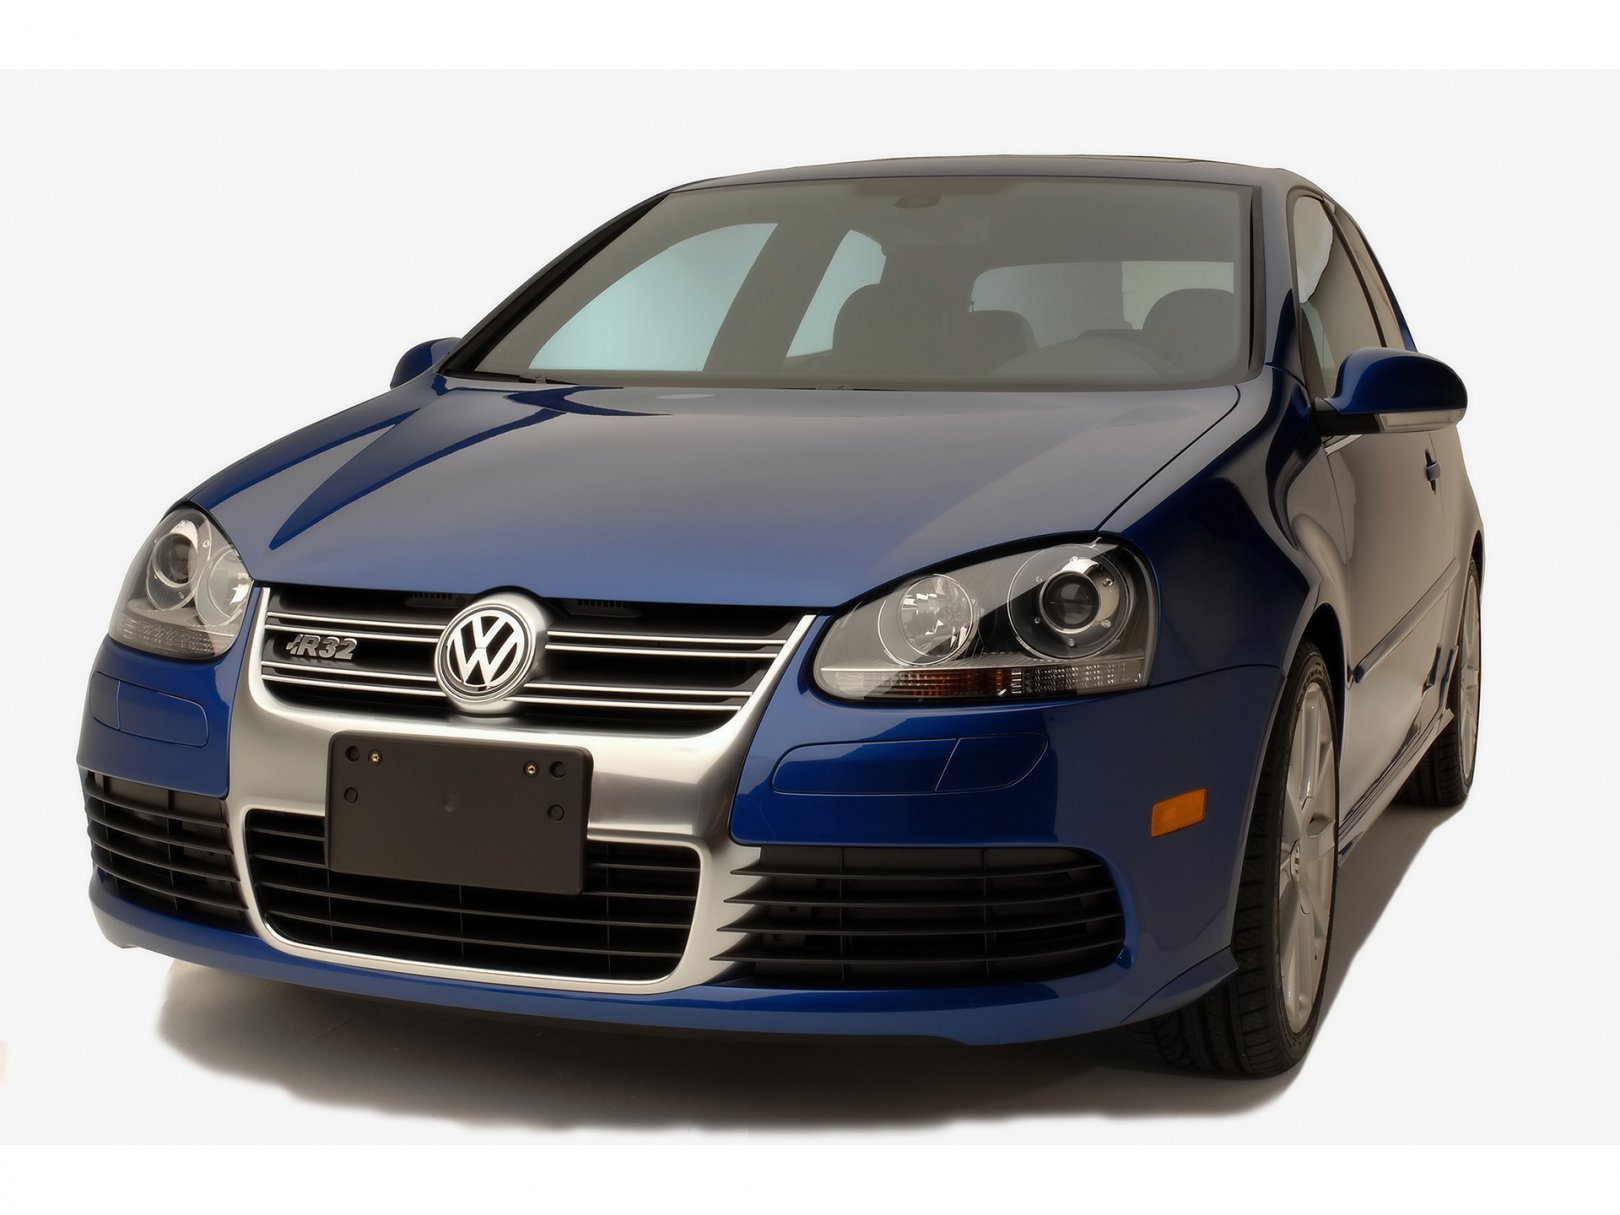 Foto: Volkswagen R32 Front Angle (2008)